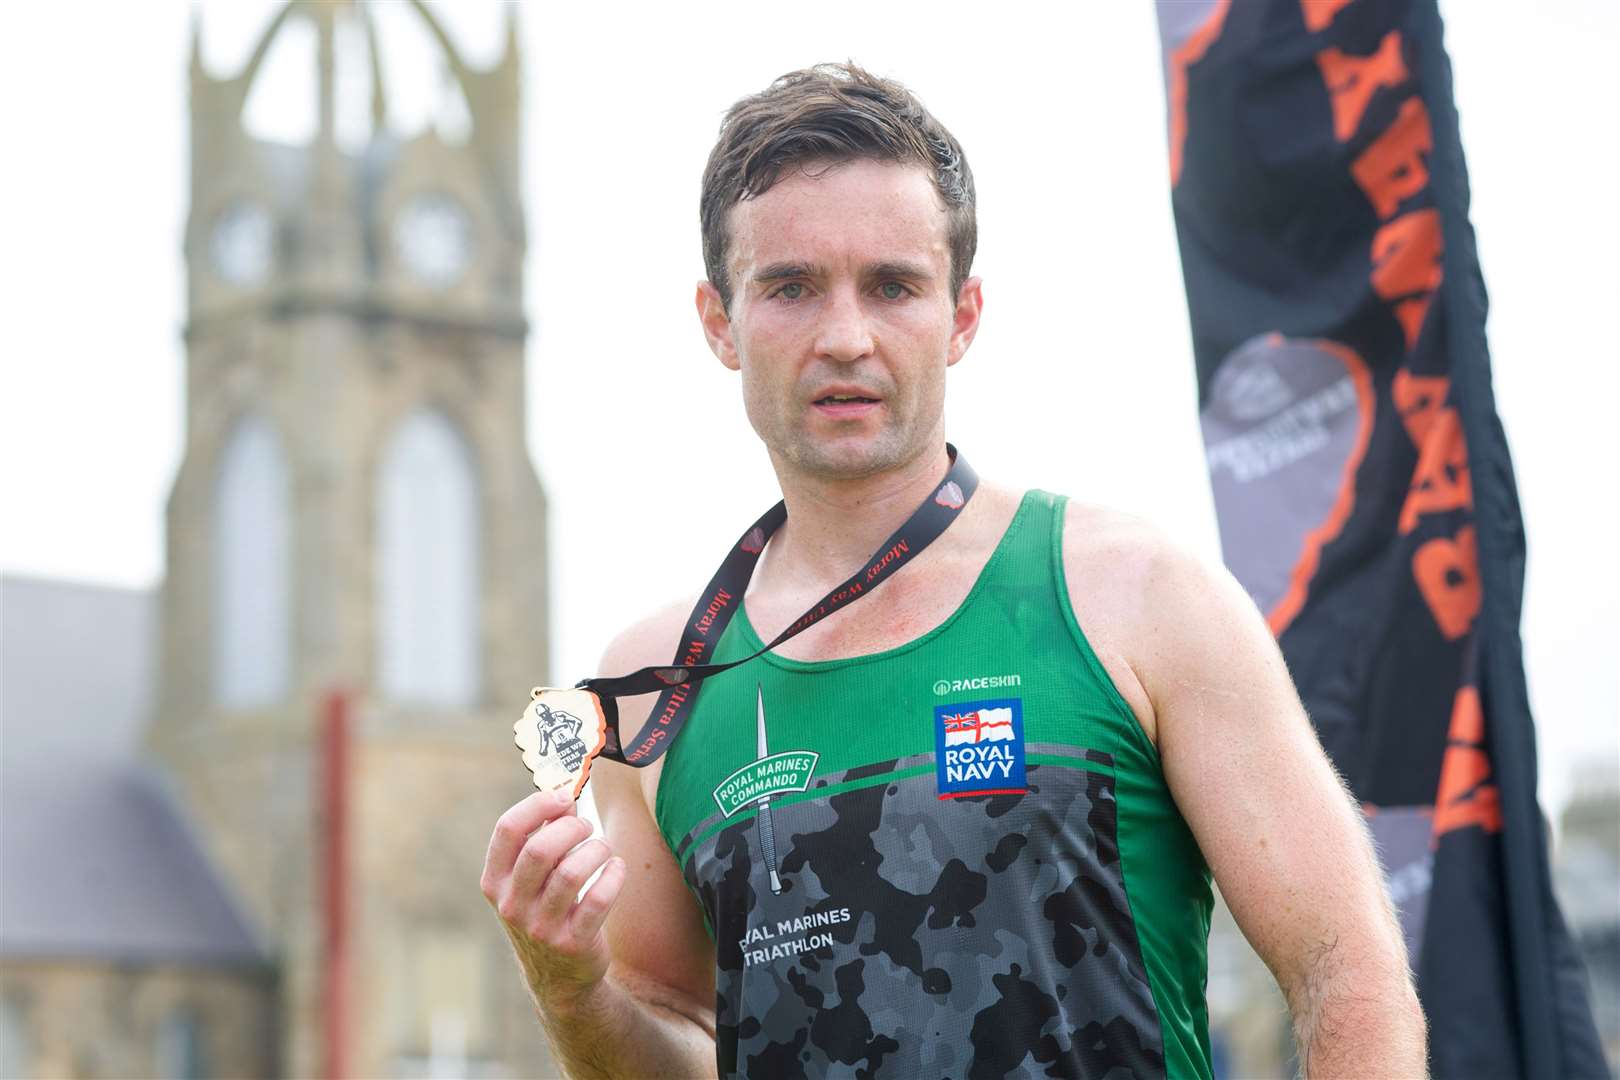 Andy Bryce won last year's 36 mile Speyside Way ultra.Picture: Daniel Forsyth